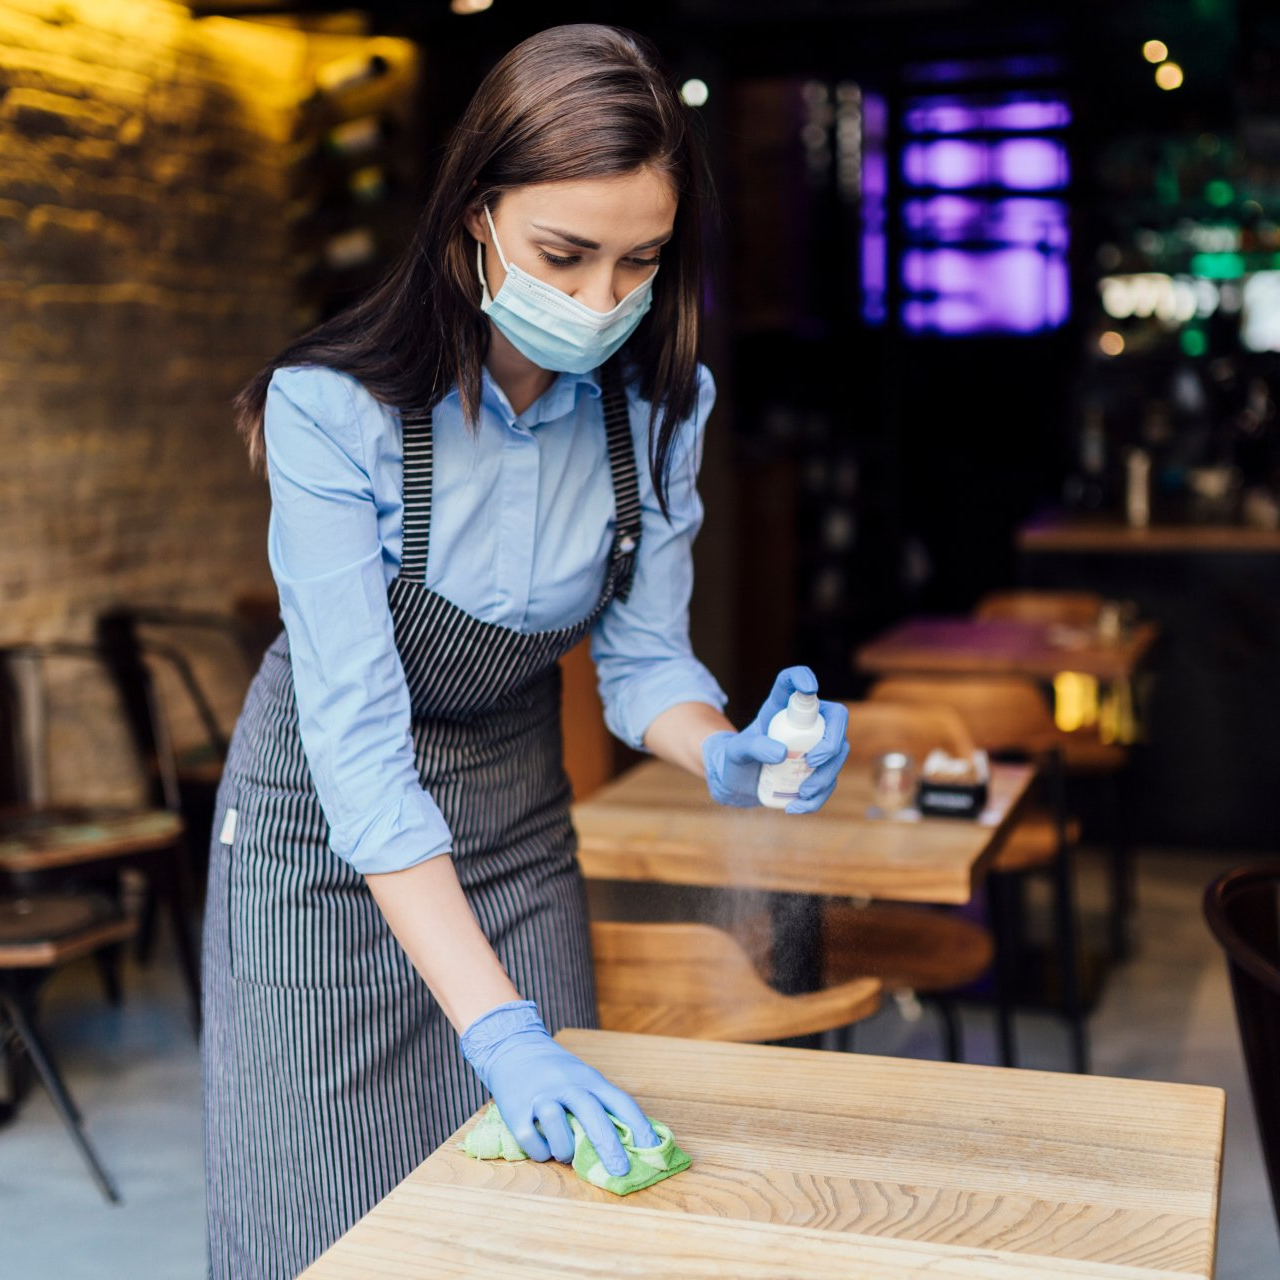 Young Caucasian female waitress wearing an apron, face mask and gloves, cleaning the tables using a wet wipe and a sanitizer